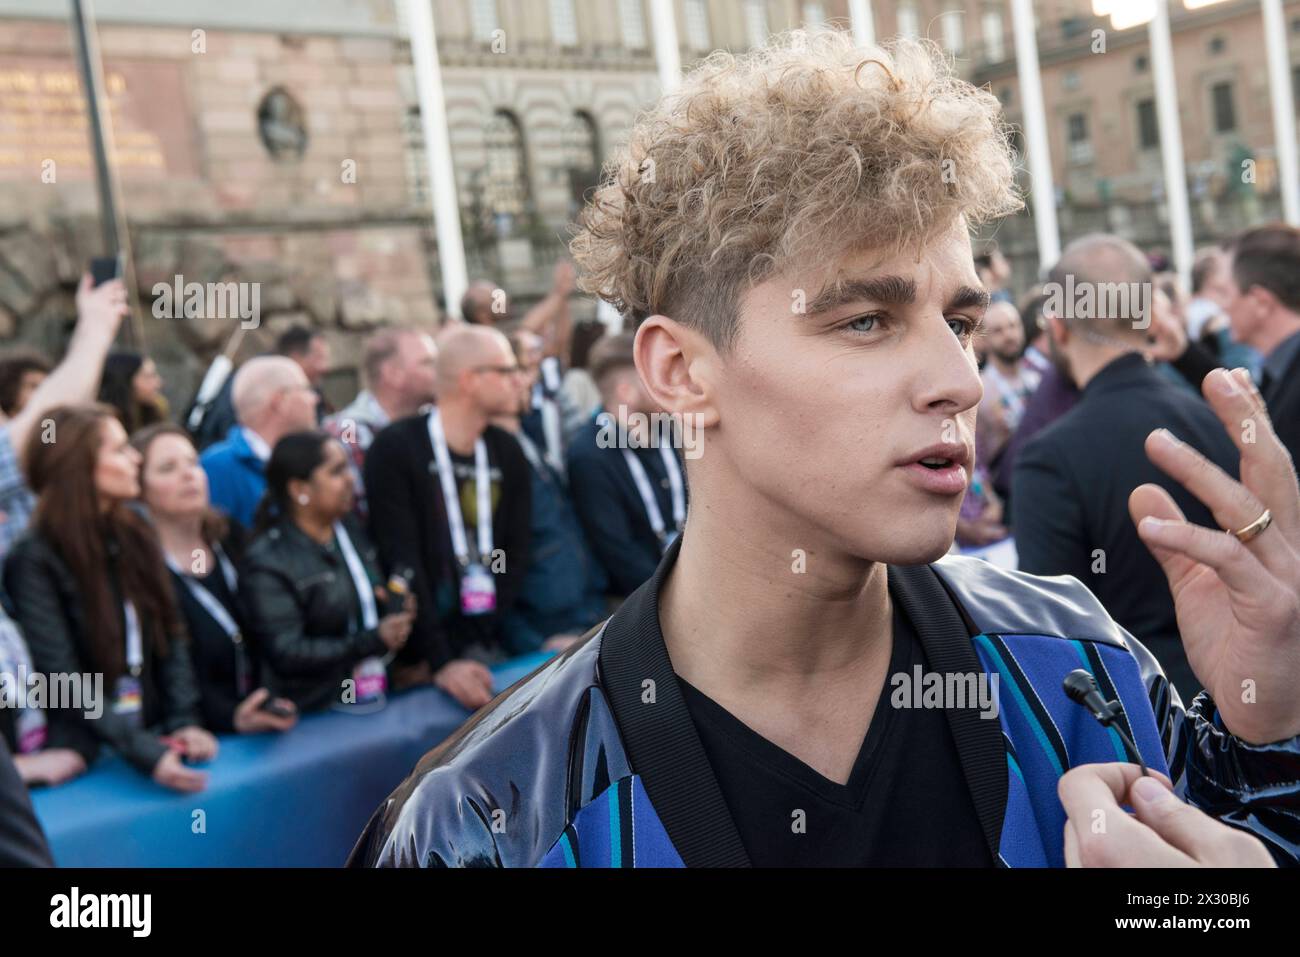 Eurovision Song Contest 2016, Stockholm, Sweden Stockholm, Sweden. 8 May. Donny Montell from Lithuania on the red carpet for the ESC 2016. Stockholm Euroclub Sweden *** Eurovision Song Contest 2016, Stockholm, Sweden Stockholm, Sweden 8 May Donny Montell from Lithuania on the red carpet for the ESC 2016 Stockholm Euroclub Sweden Stock Photo